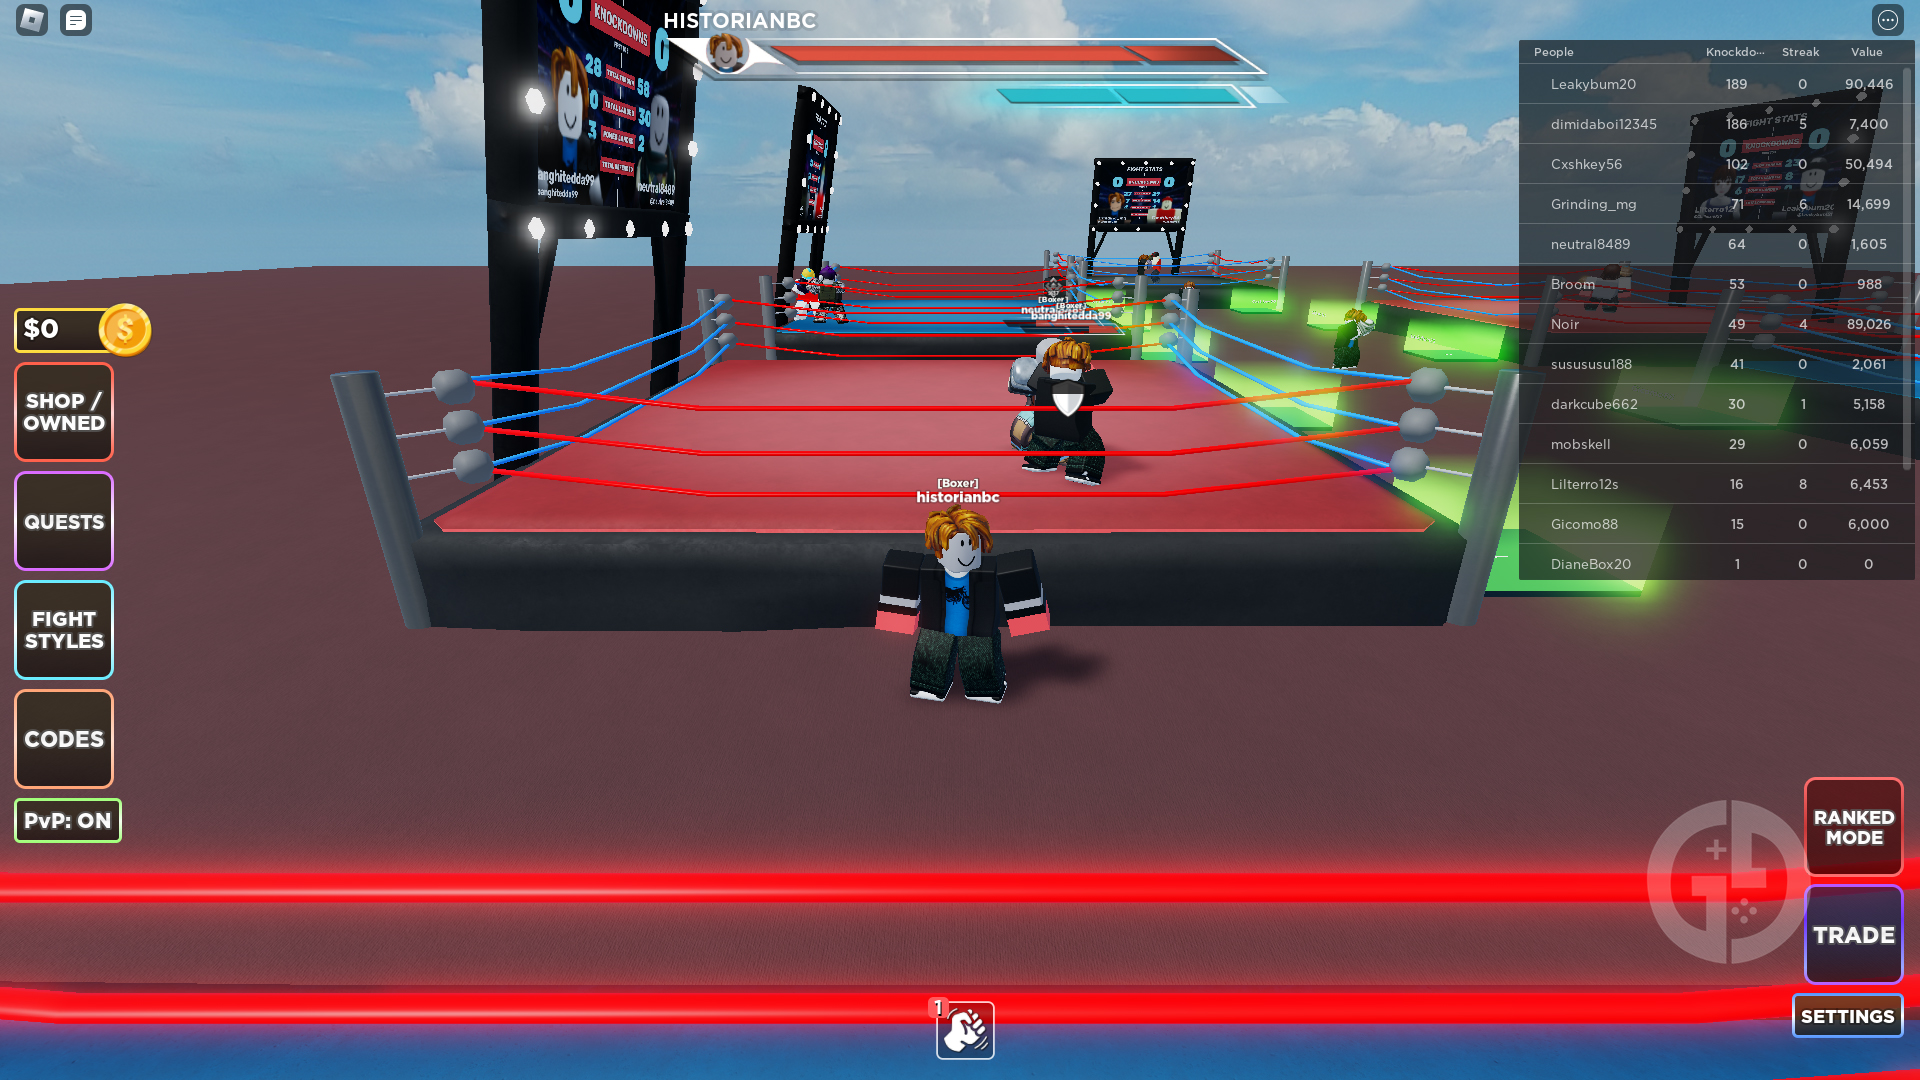 FREEDOM] 🥊untitled boxing game🥊 - Roblox